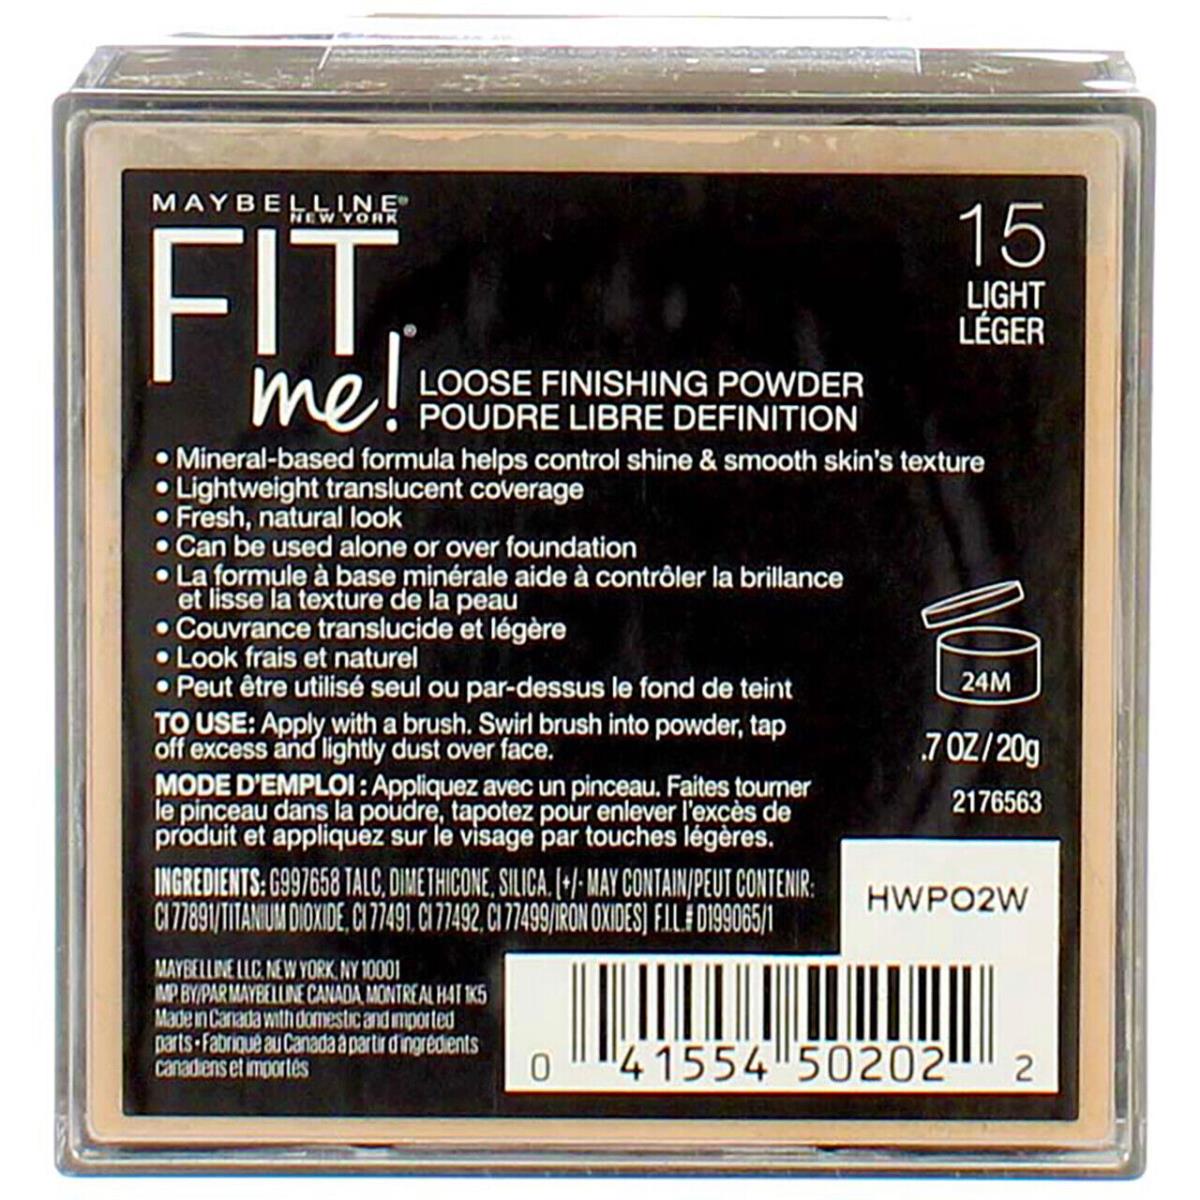 4 Pack Maybelline Fit Me Loose Finishing Powder Light 15 0.7 oz